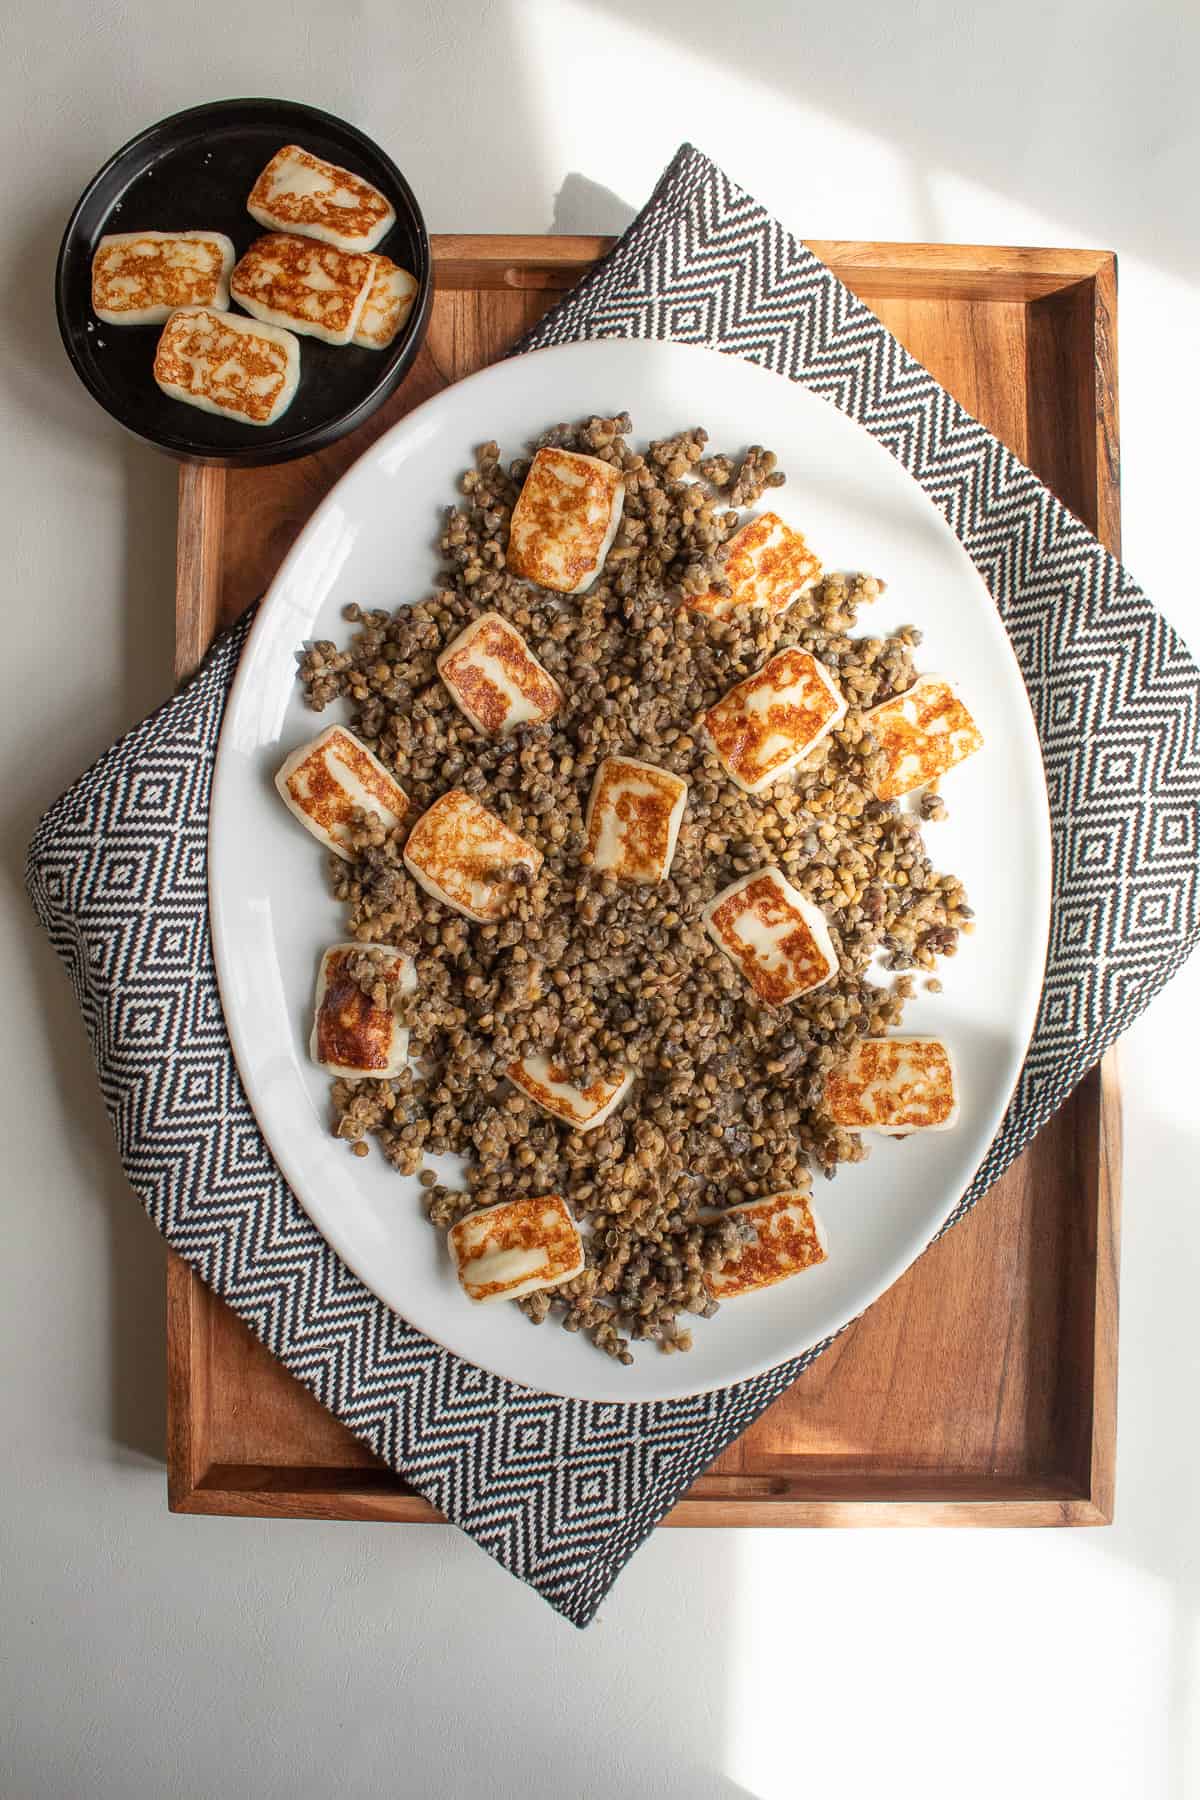 Halloumi cheese is nestled into the layer of lentils on a white platter.